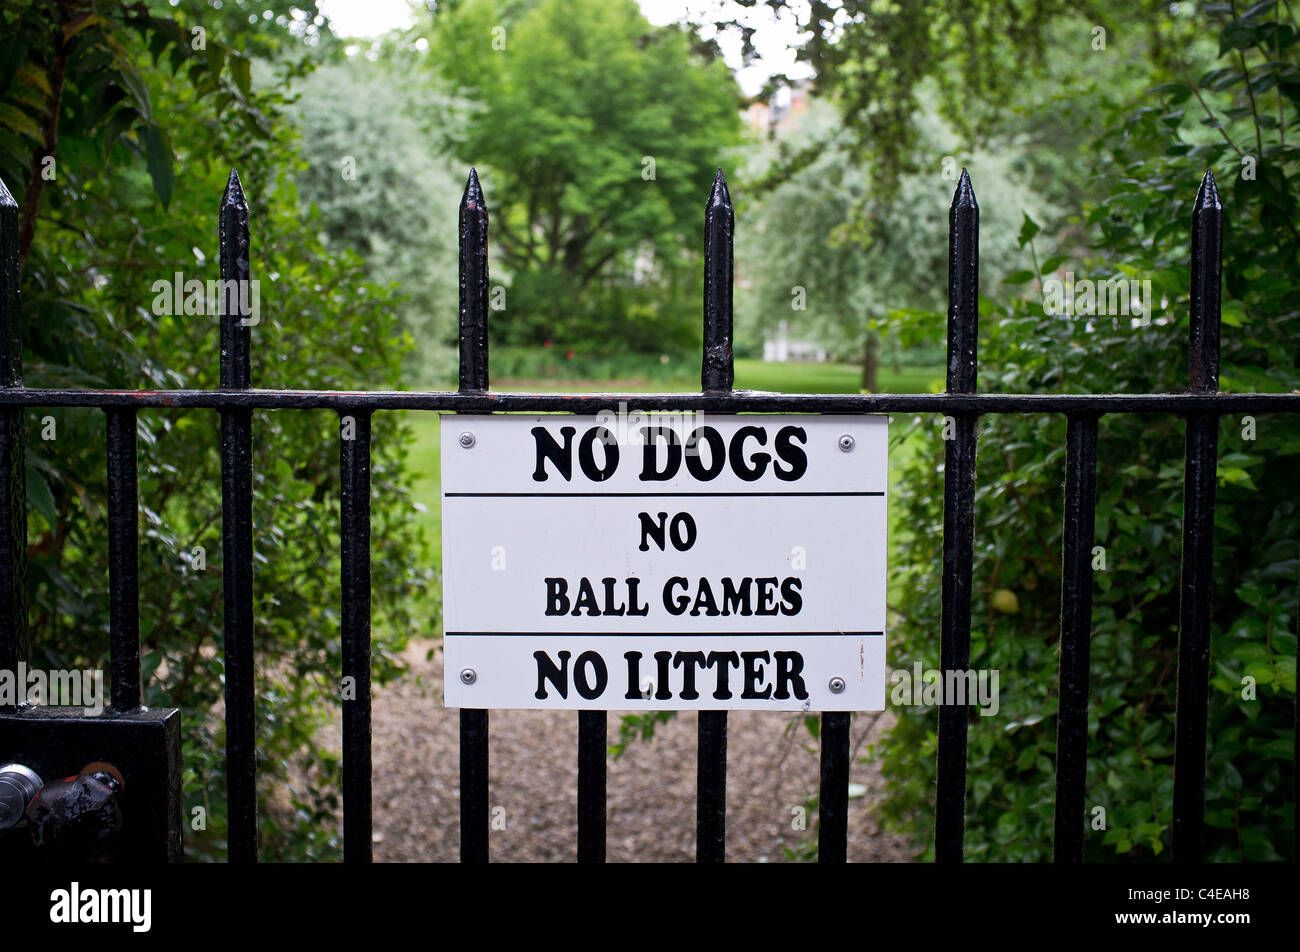 No Dogs No Ball Games No Litter sign on park gates Stock Photo